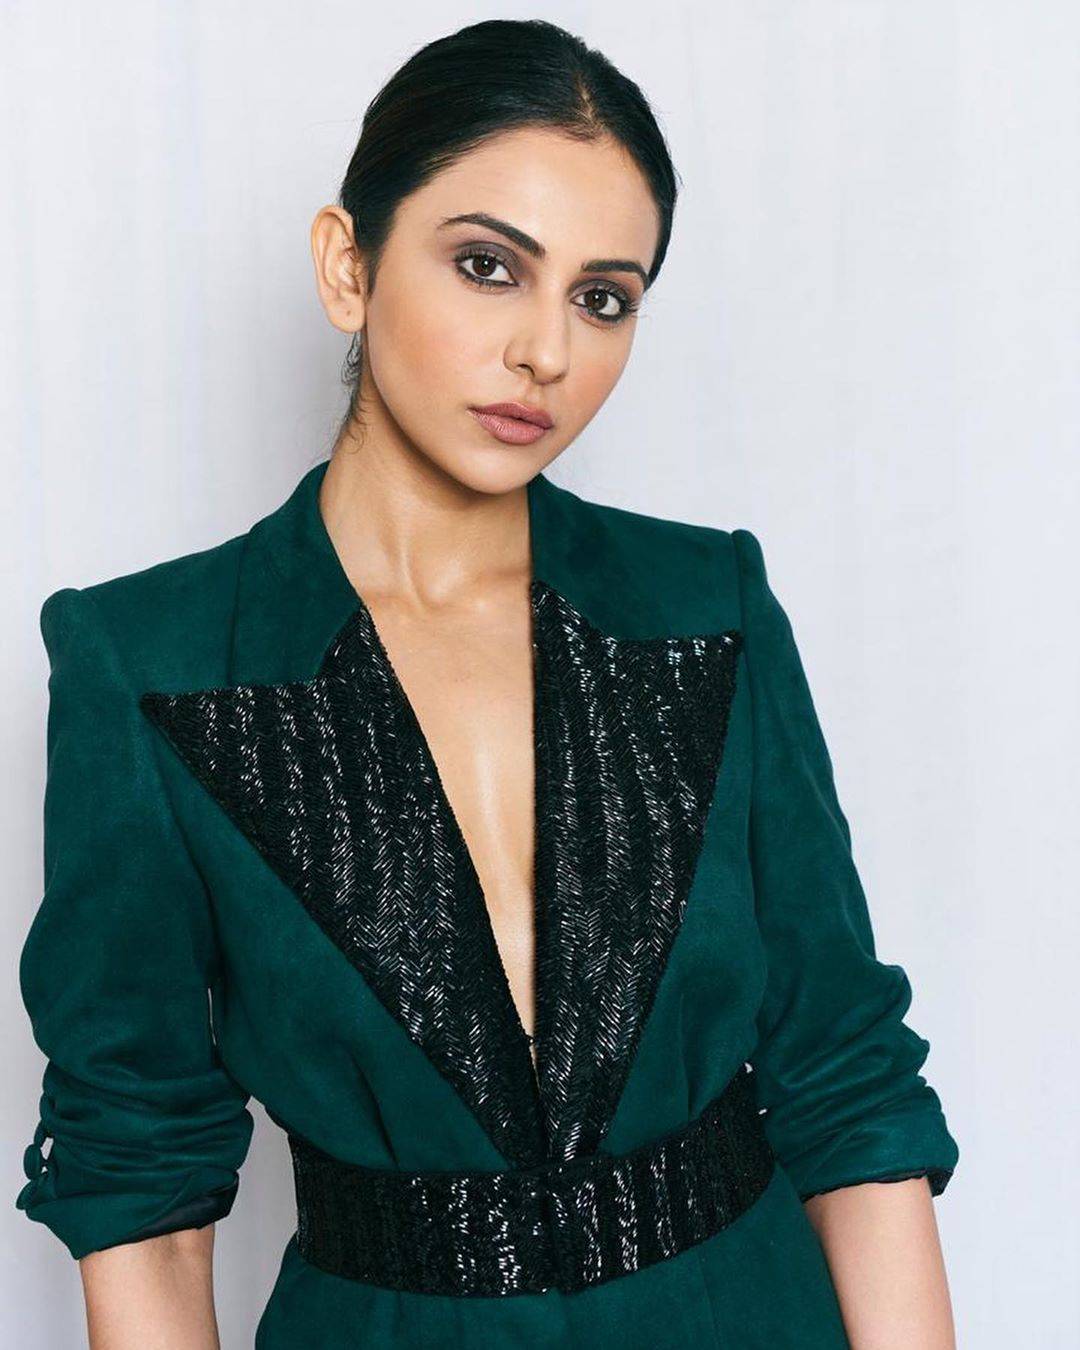 Makeup, as is always the case, is on point with Rakul Preet. Smokey eyes with dark green outfit, is the takeaway from this outfit - Fashion Models